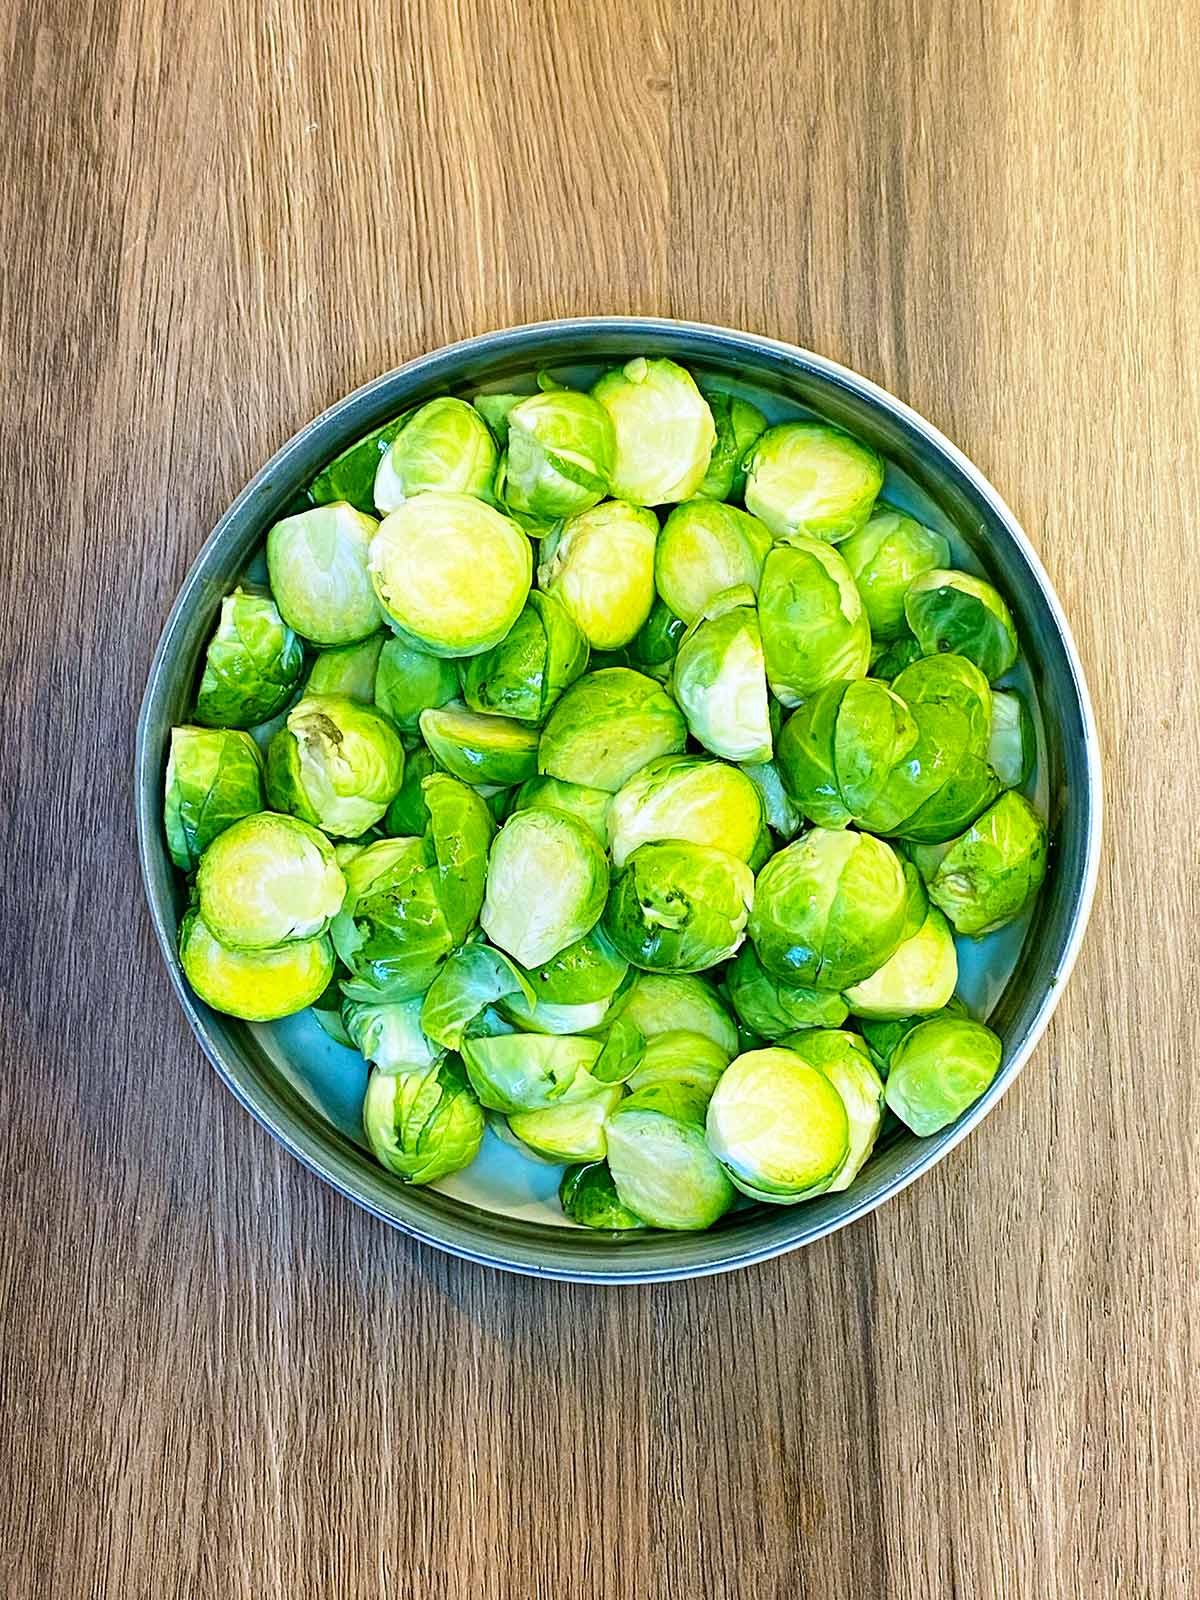 A bowl of Brussels sprouts that have been cut in half.